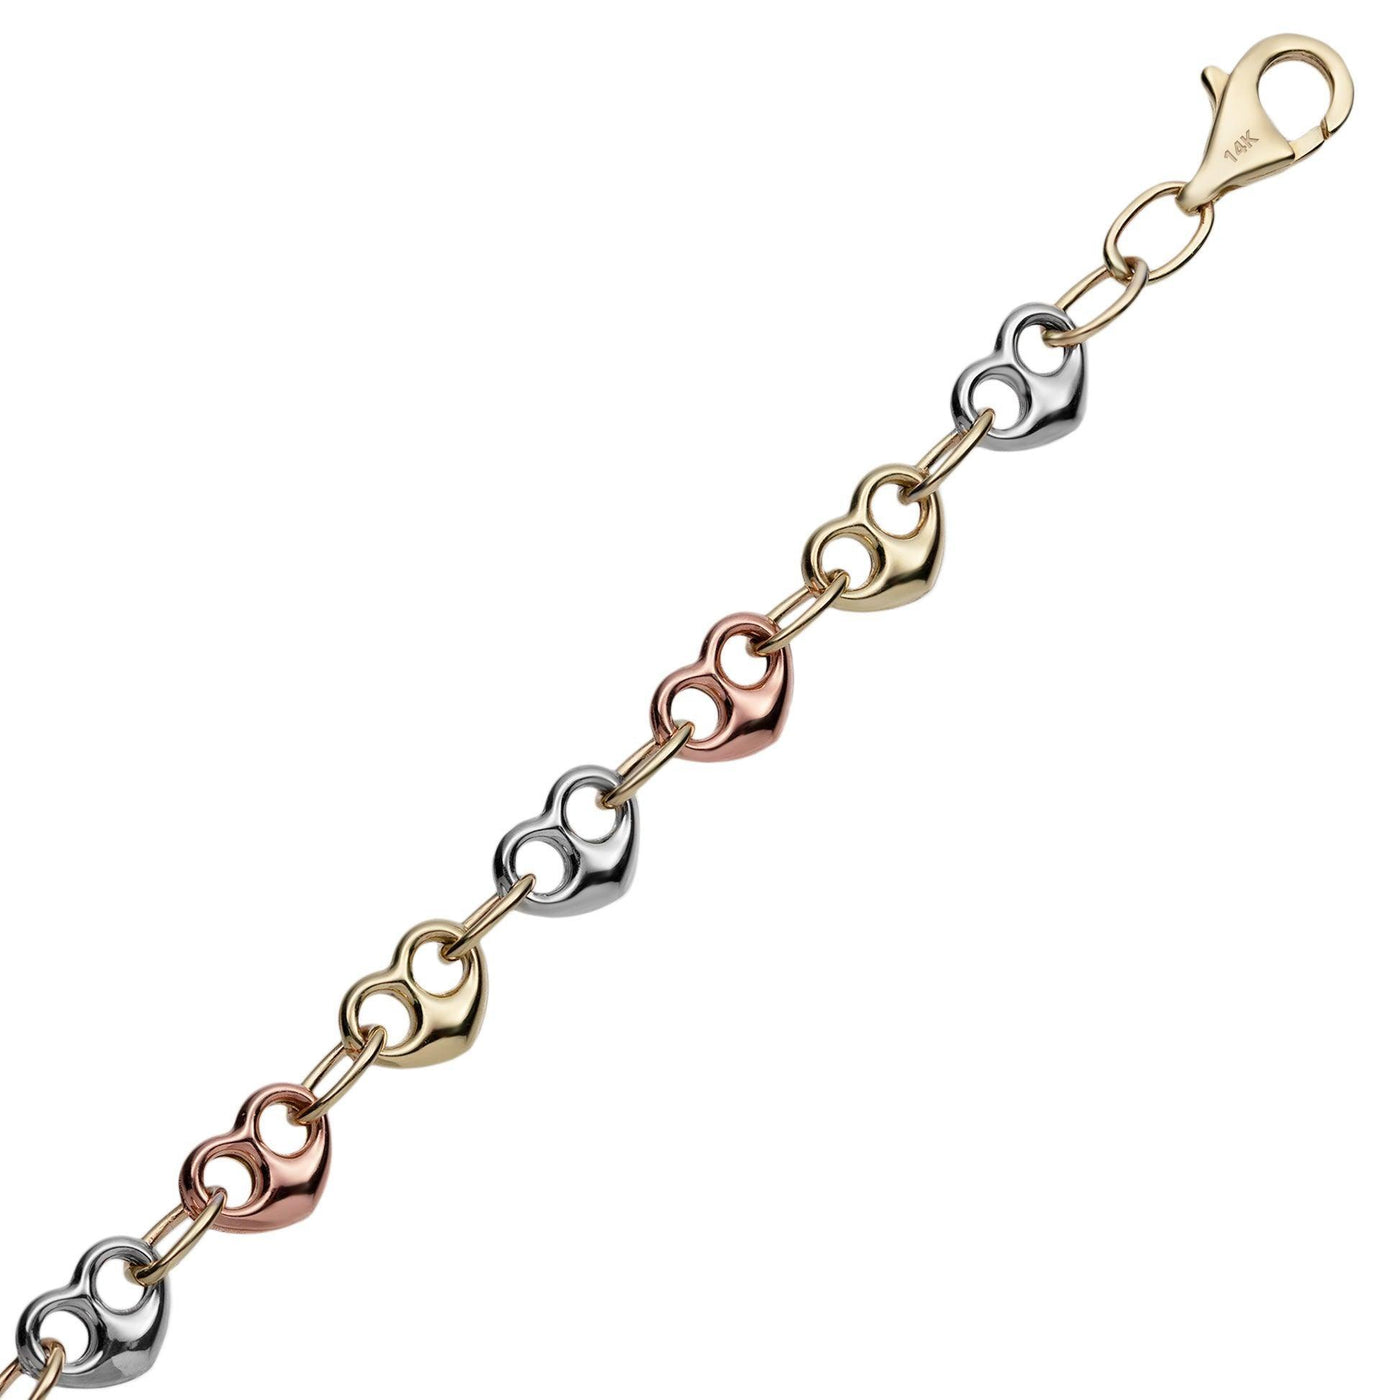 6mm Puffed Heart Shape Link Necklace 14K Tri-Color Gold - bayamjewelry